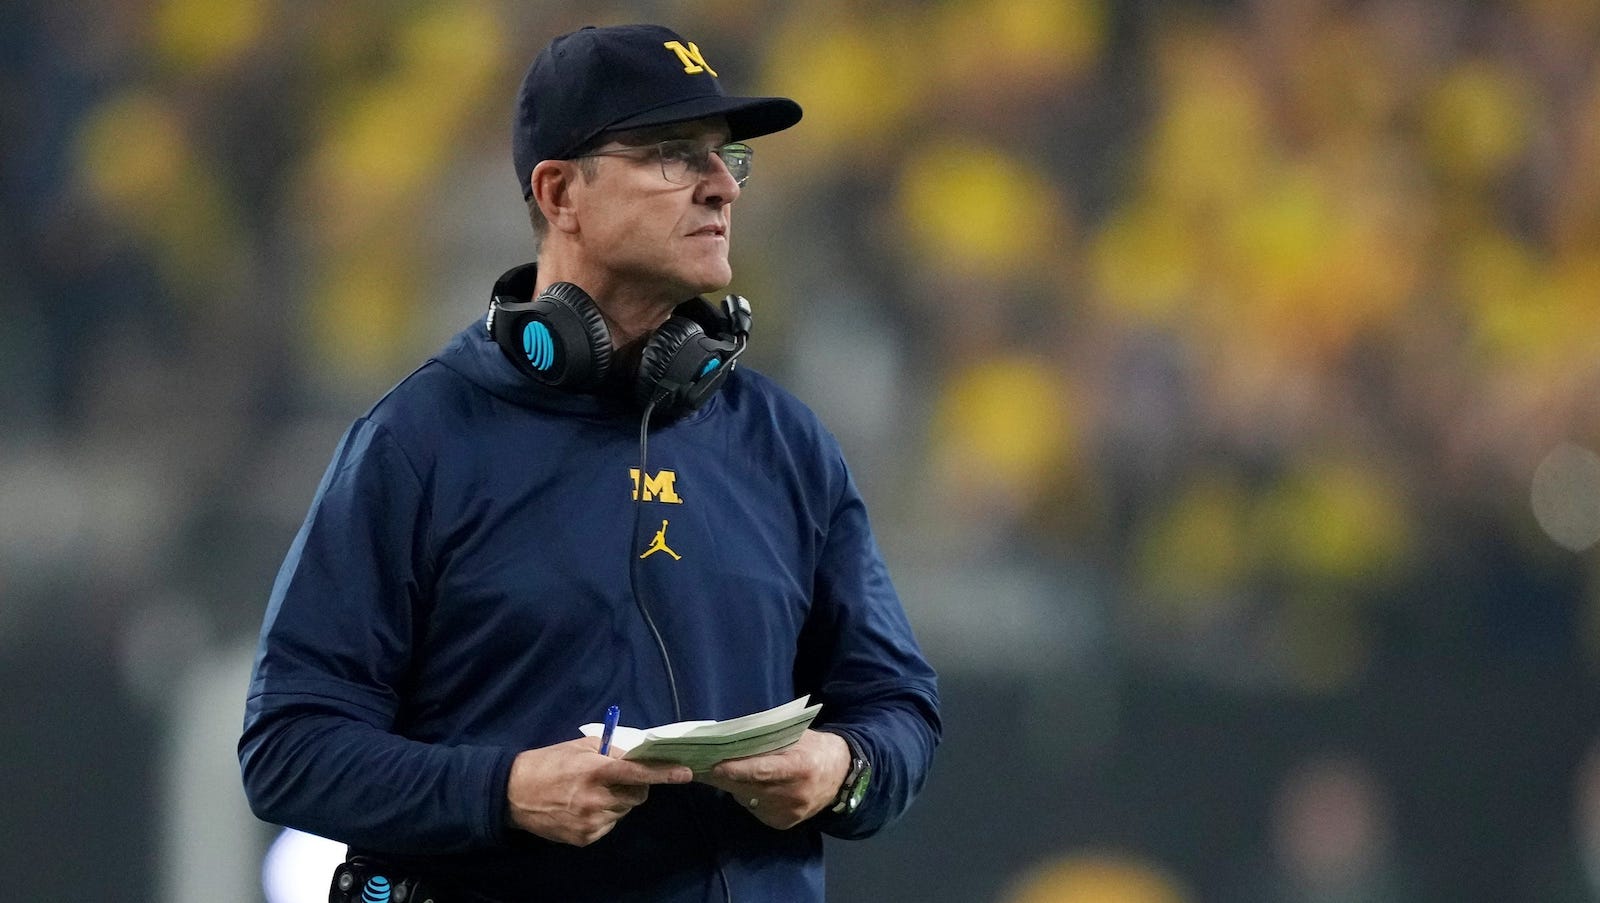 Former University of Michigan coach Jim Harbaugh was hired by the Los Angeles Chargers